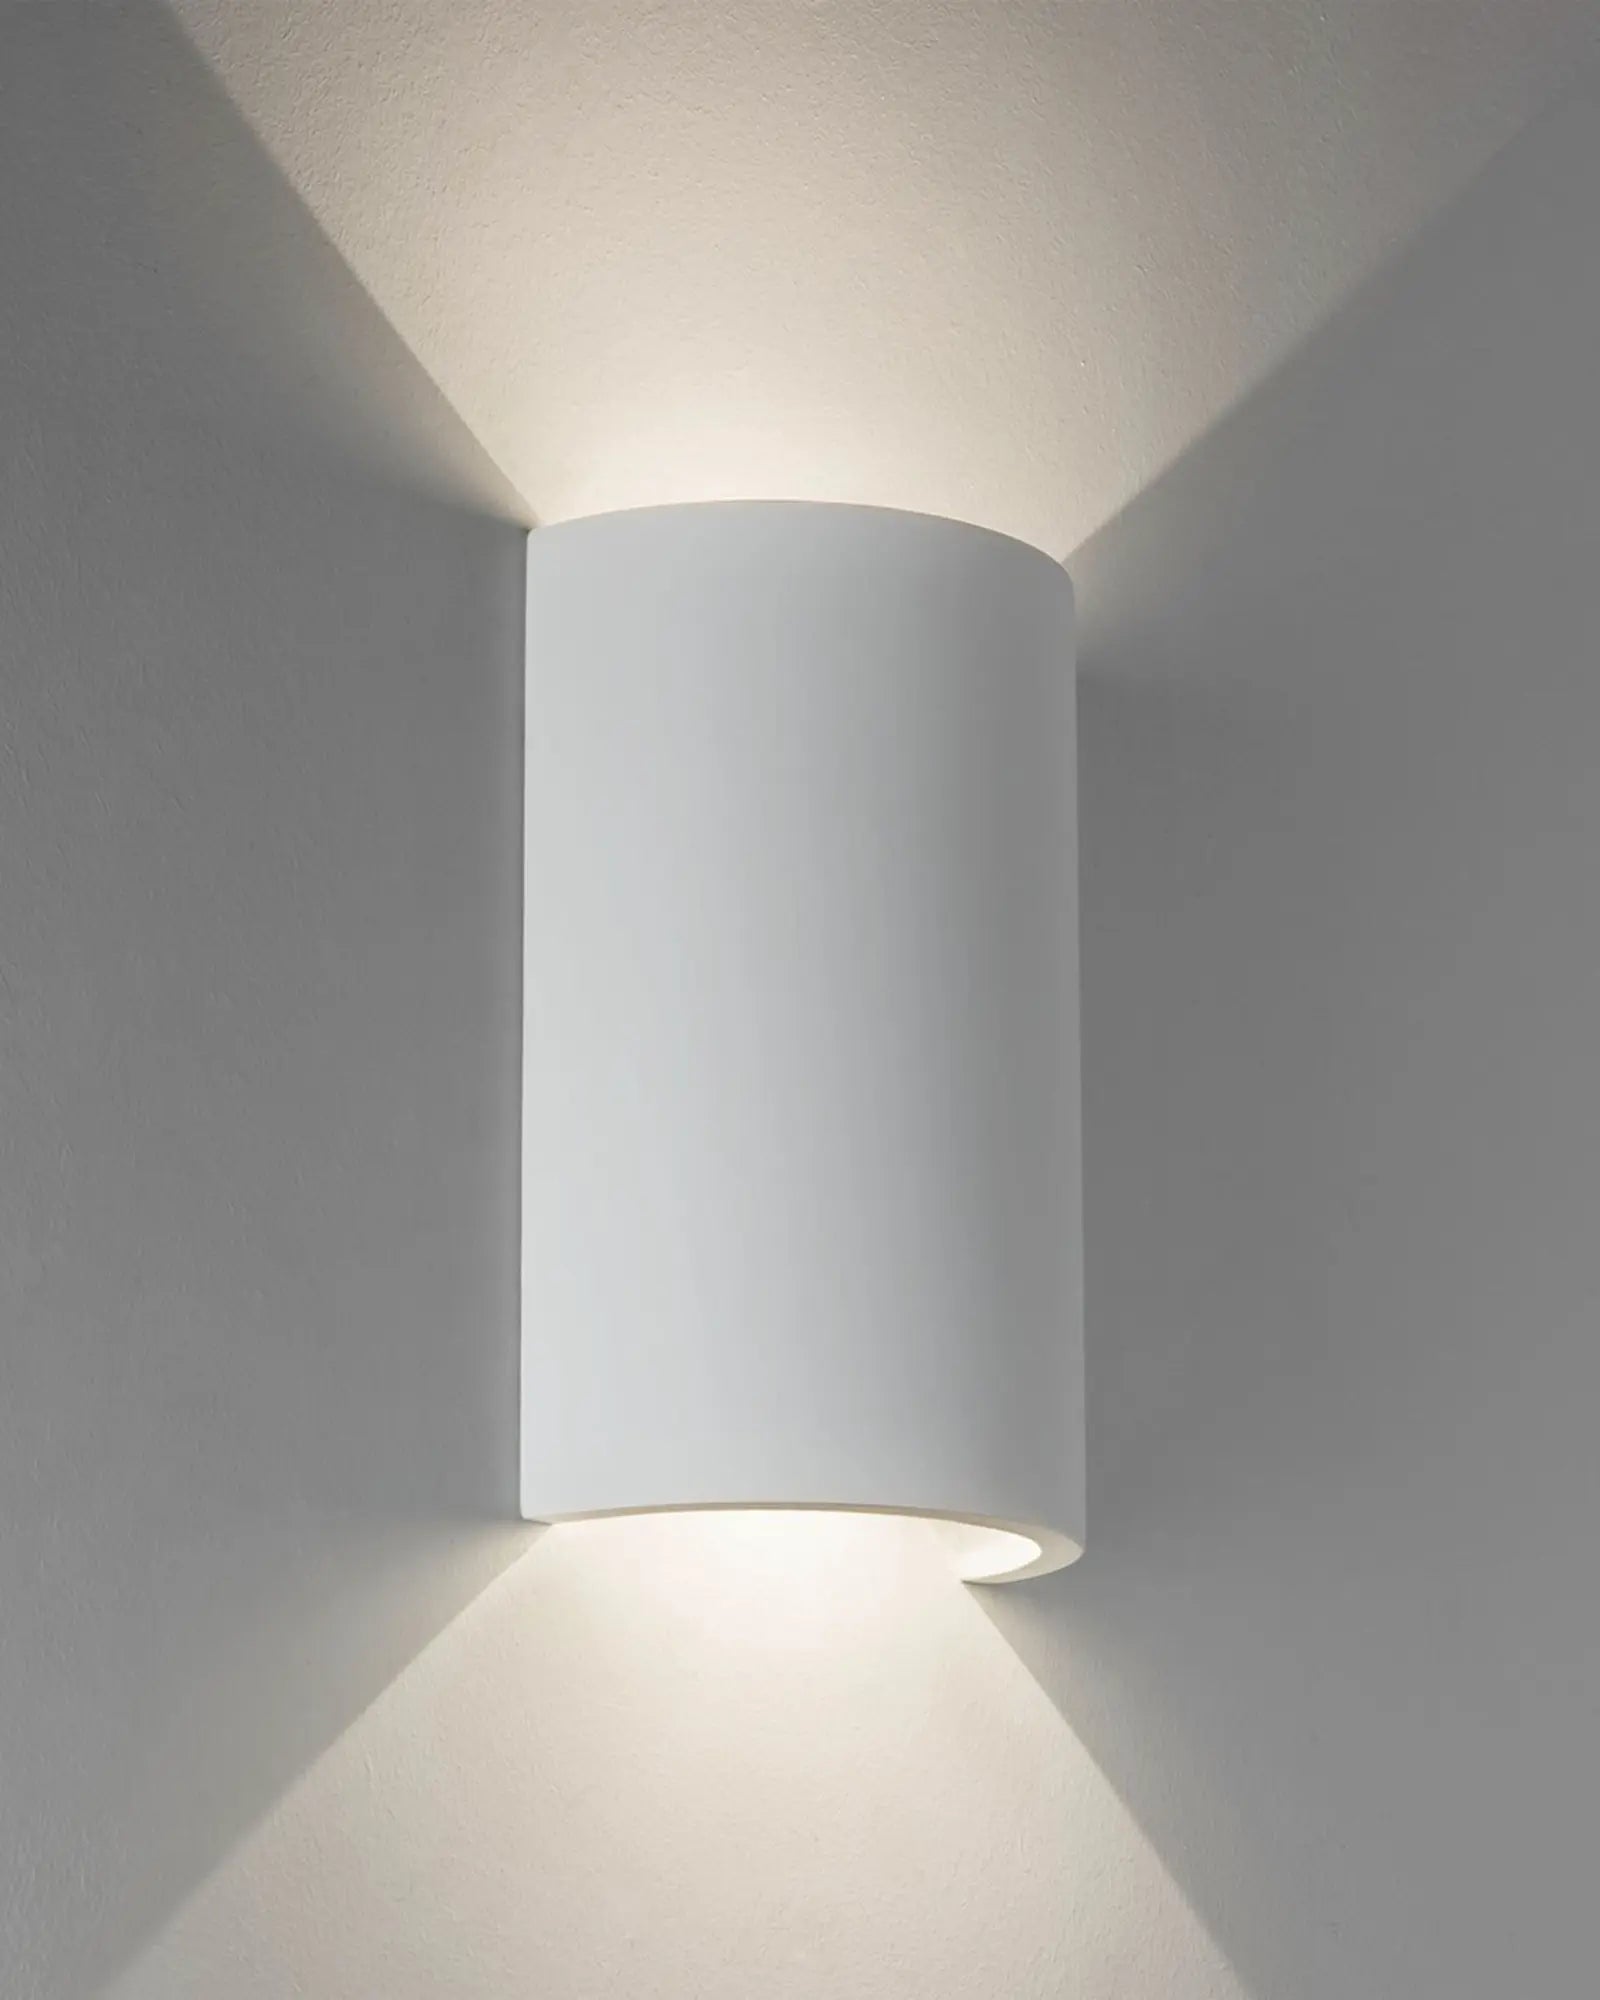 Serifos contemporary plaster curved wall light